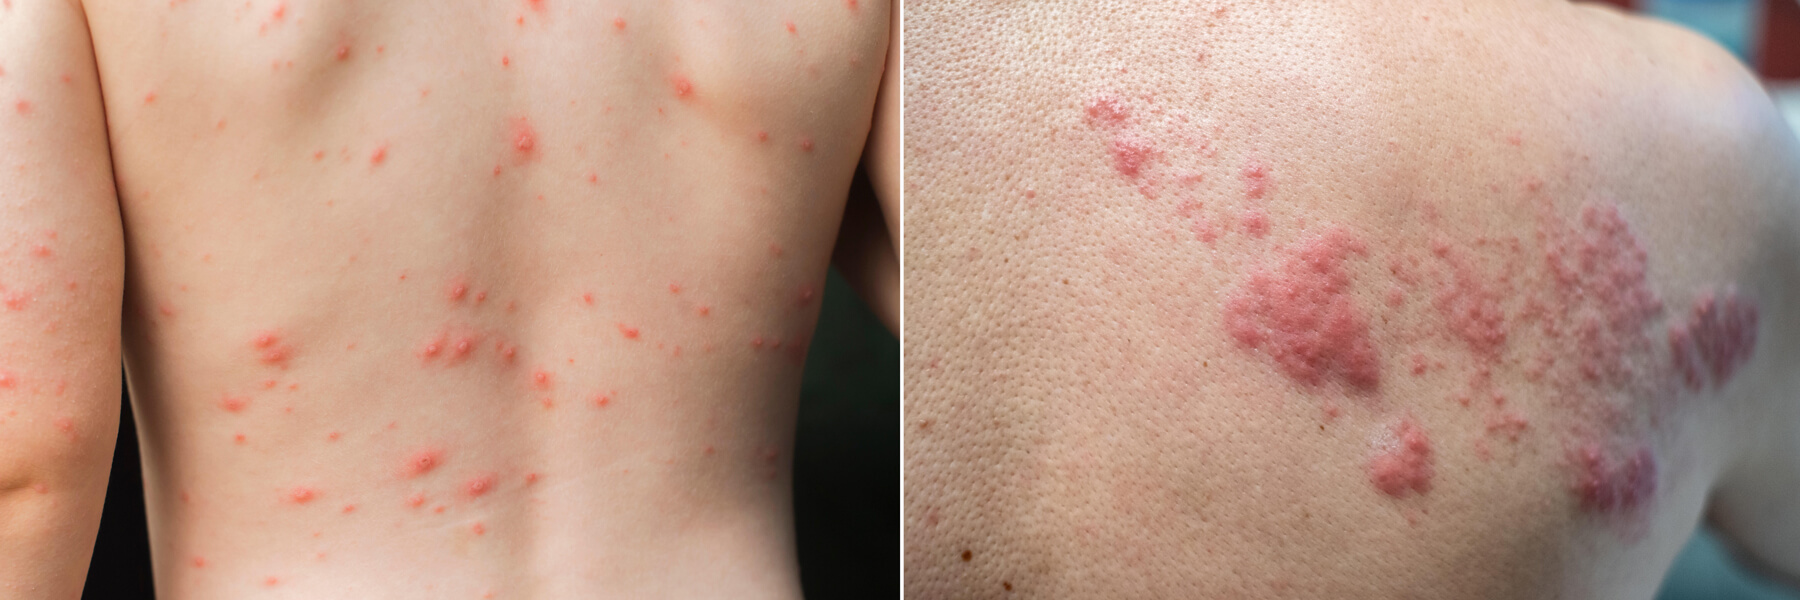 Photograph of two backs with red welts on them. The one on the left is a chickenpox rash and the one on the right, a case of shingles.